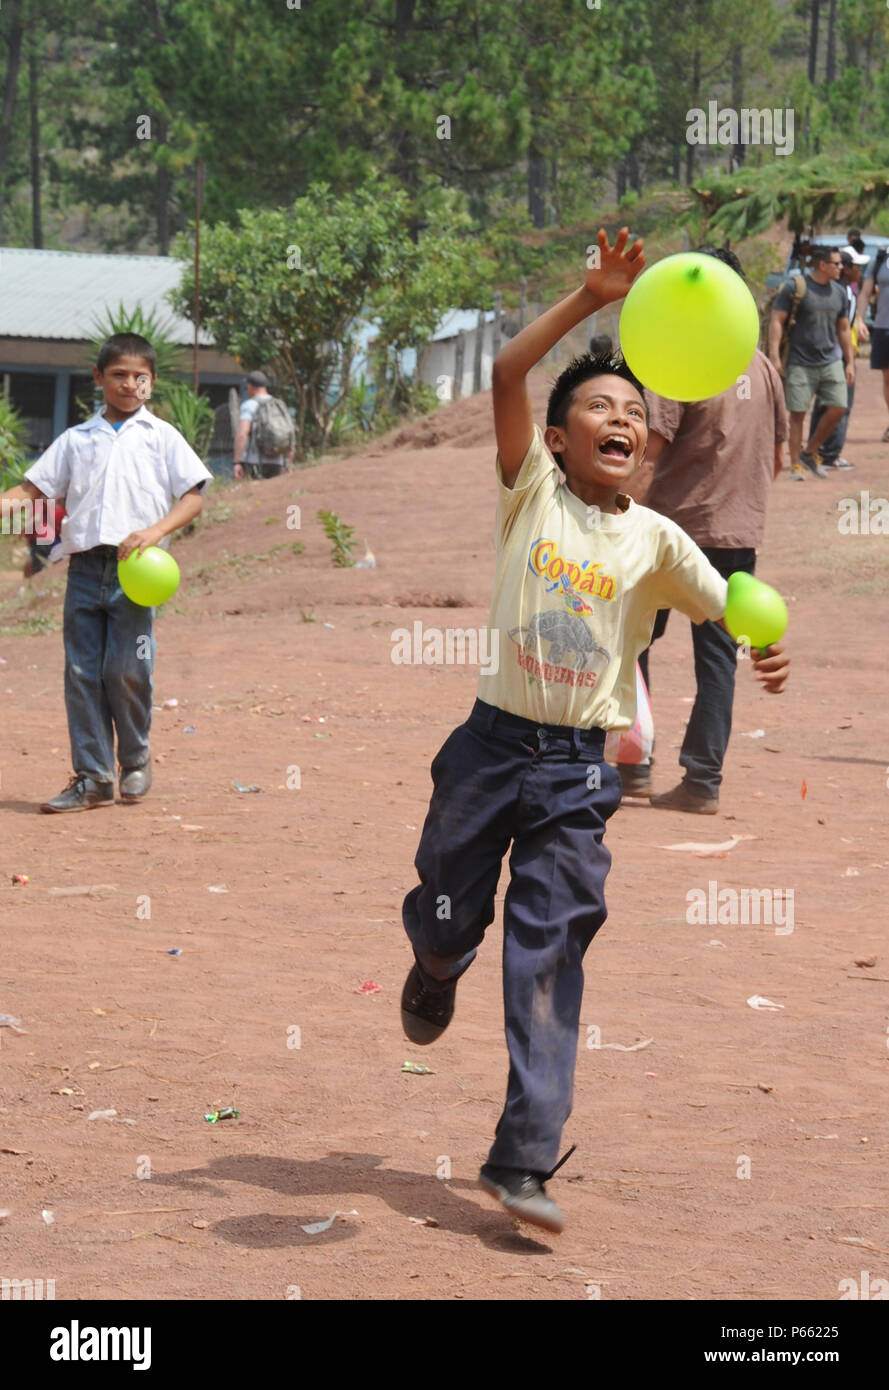 A Honduran boy from the village of Montaña La Oki, located in the mountains east of Comayagua, Honduras, plays with a balloon given to him by one of the 158 military and civilian members of Joint Task Force-Bravo and volunteer firefighters from the local area who hiked 7.4 miles roundtrip to deliver 3,000 pounds of food to 172 families in the village April 30, 2016. During the visit to Montaña La Oki, U.S. service members had the opportunity to watch local school children perform cultural dances, play soccer and hand out the bags of food to villagers as well as some Hondurans who traveled to t Stock Photo